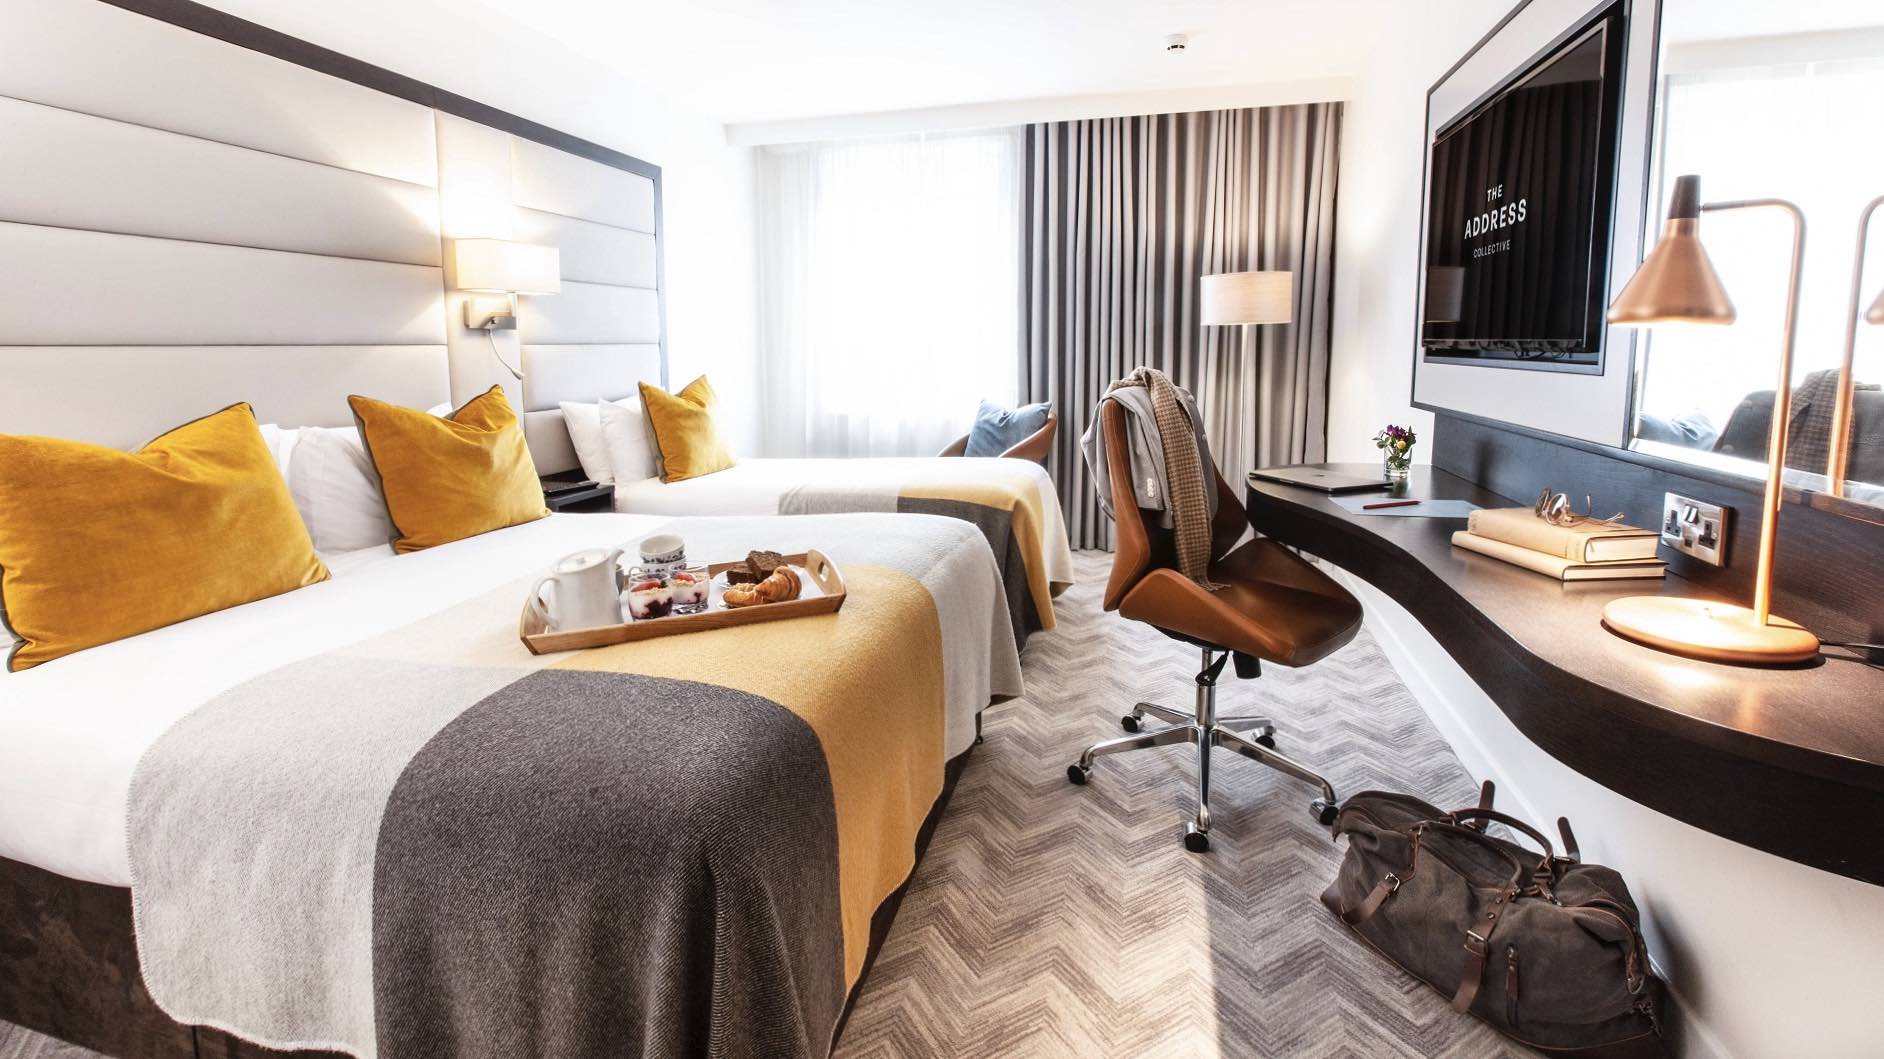 Address Connolly Classic Twin room in one of the best design hotels in dublin 